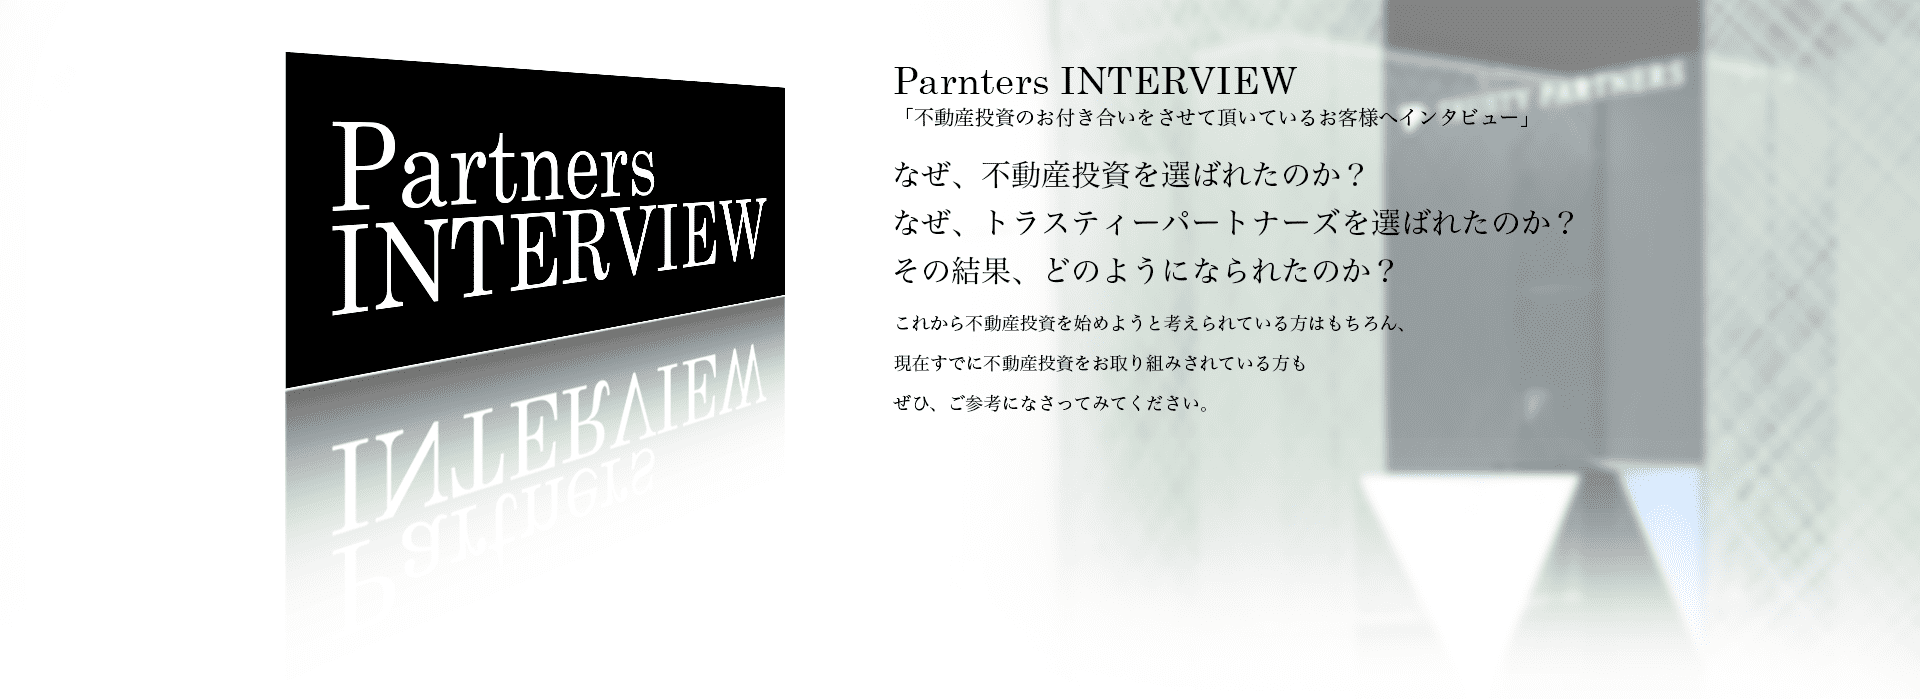 Partners INTERVIEW